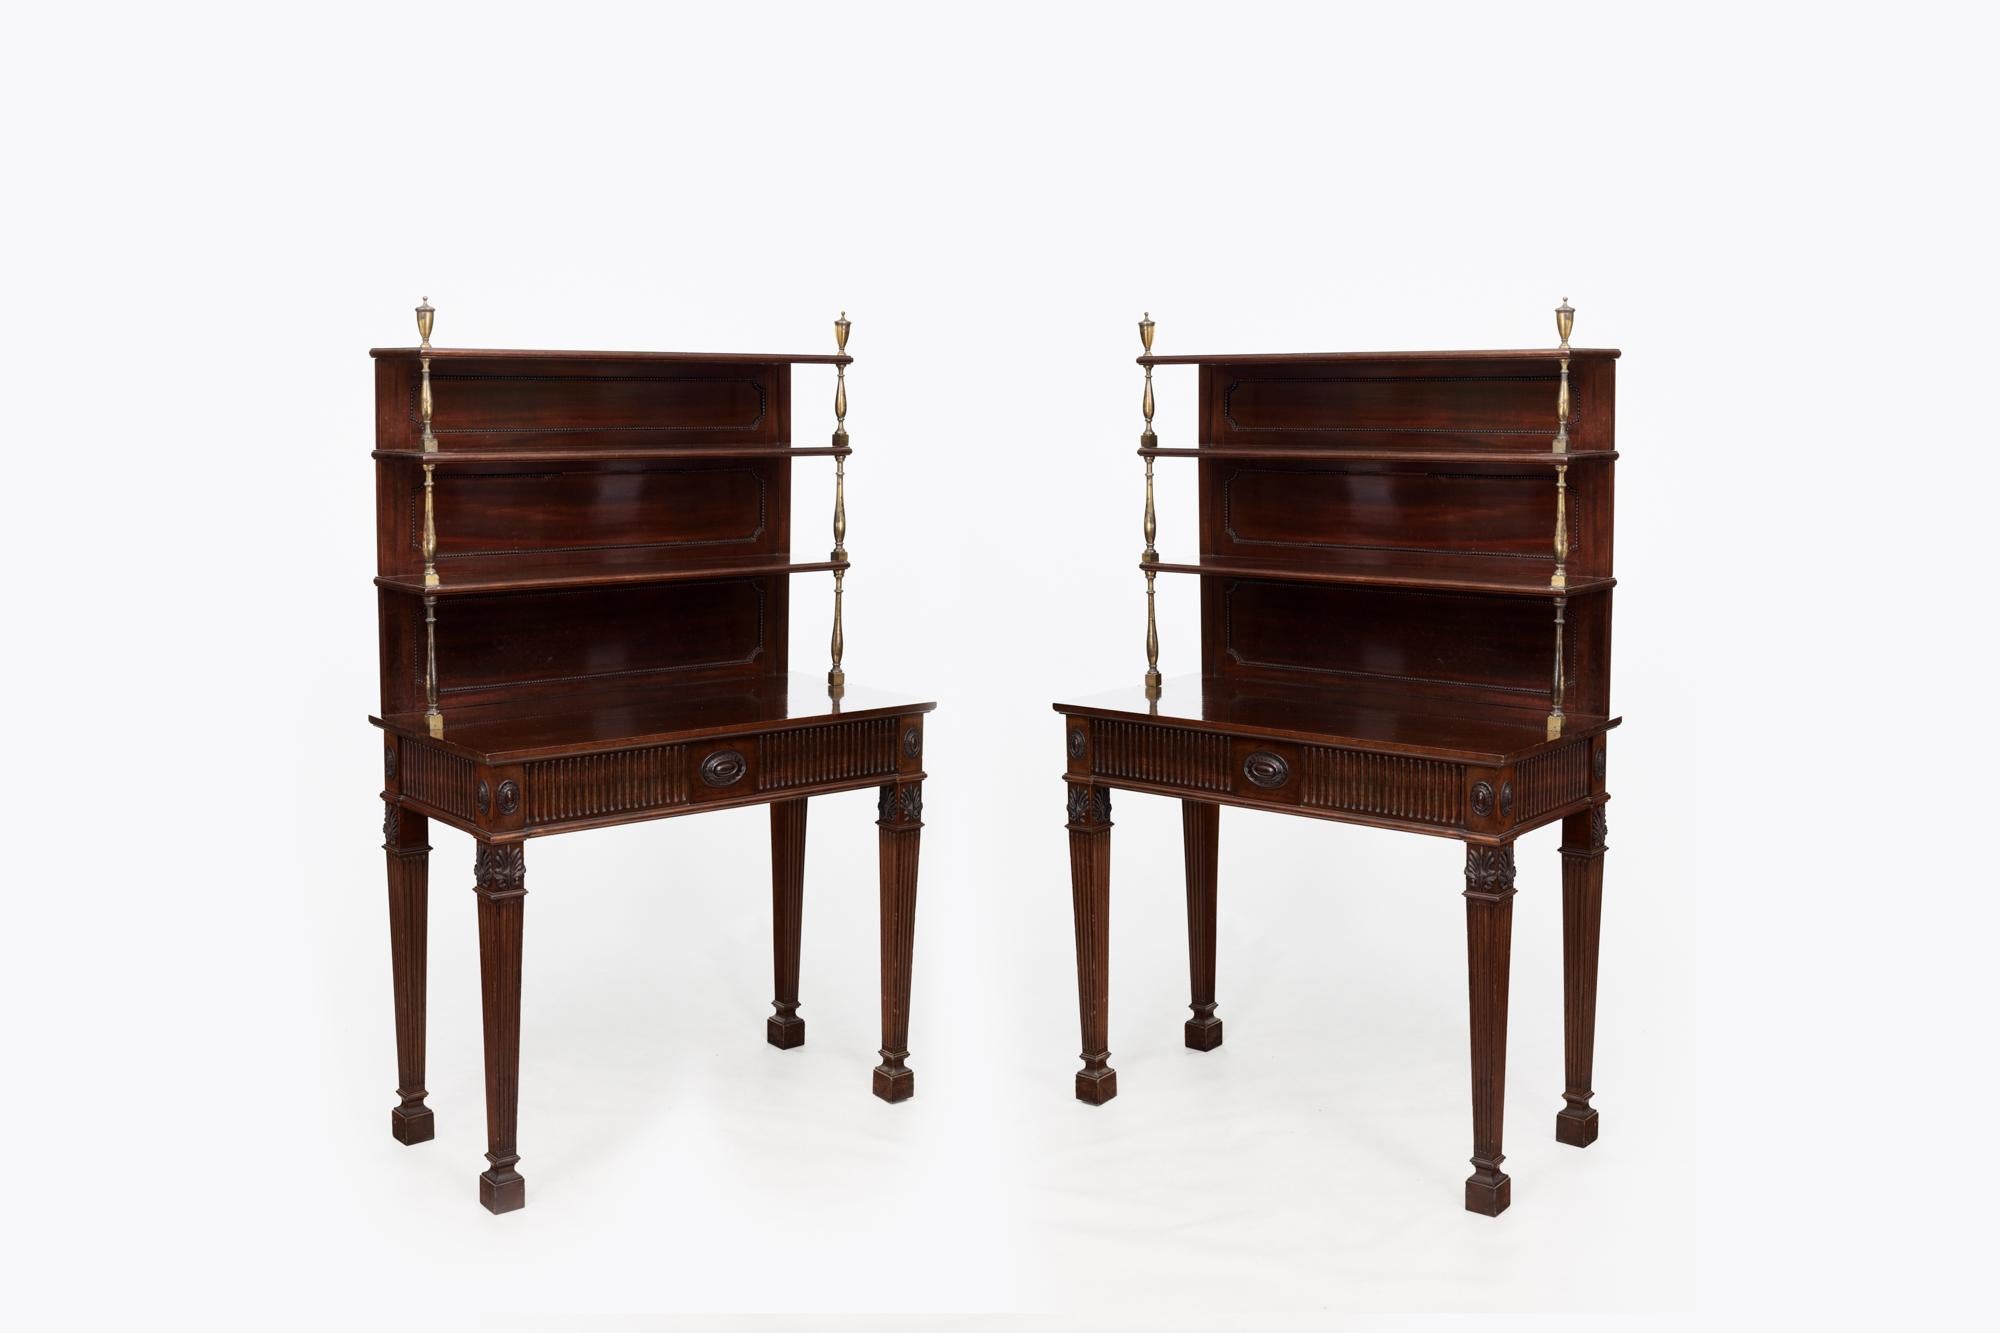 Pair 19th Century Hepplewhite mahogany chiffoniers with open shelving to the upper section supported by brass uprights topped with classical urn-shaped finials. The lower sections, in the Adam style, feature carved oval paterae and fluted details to